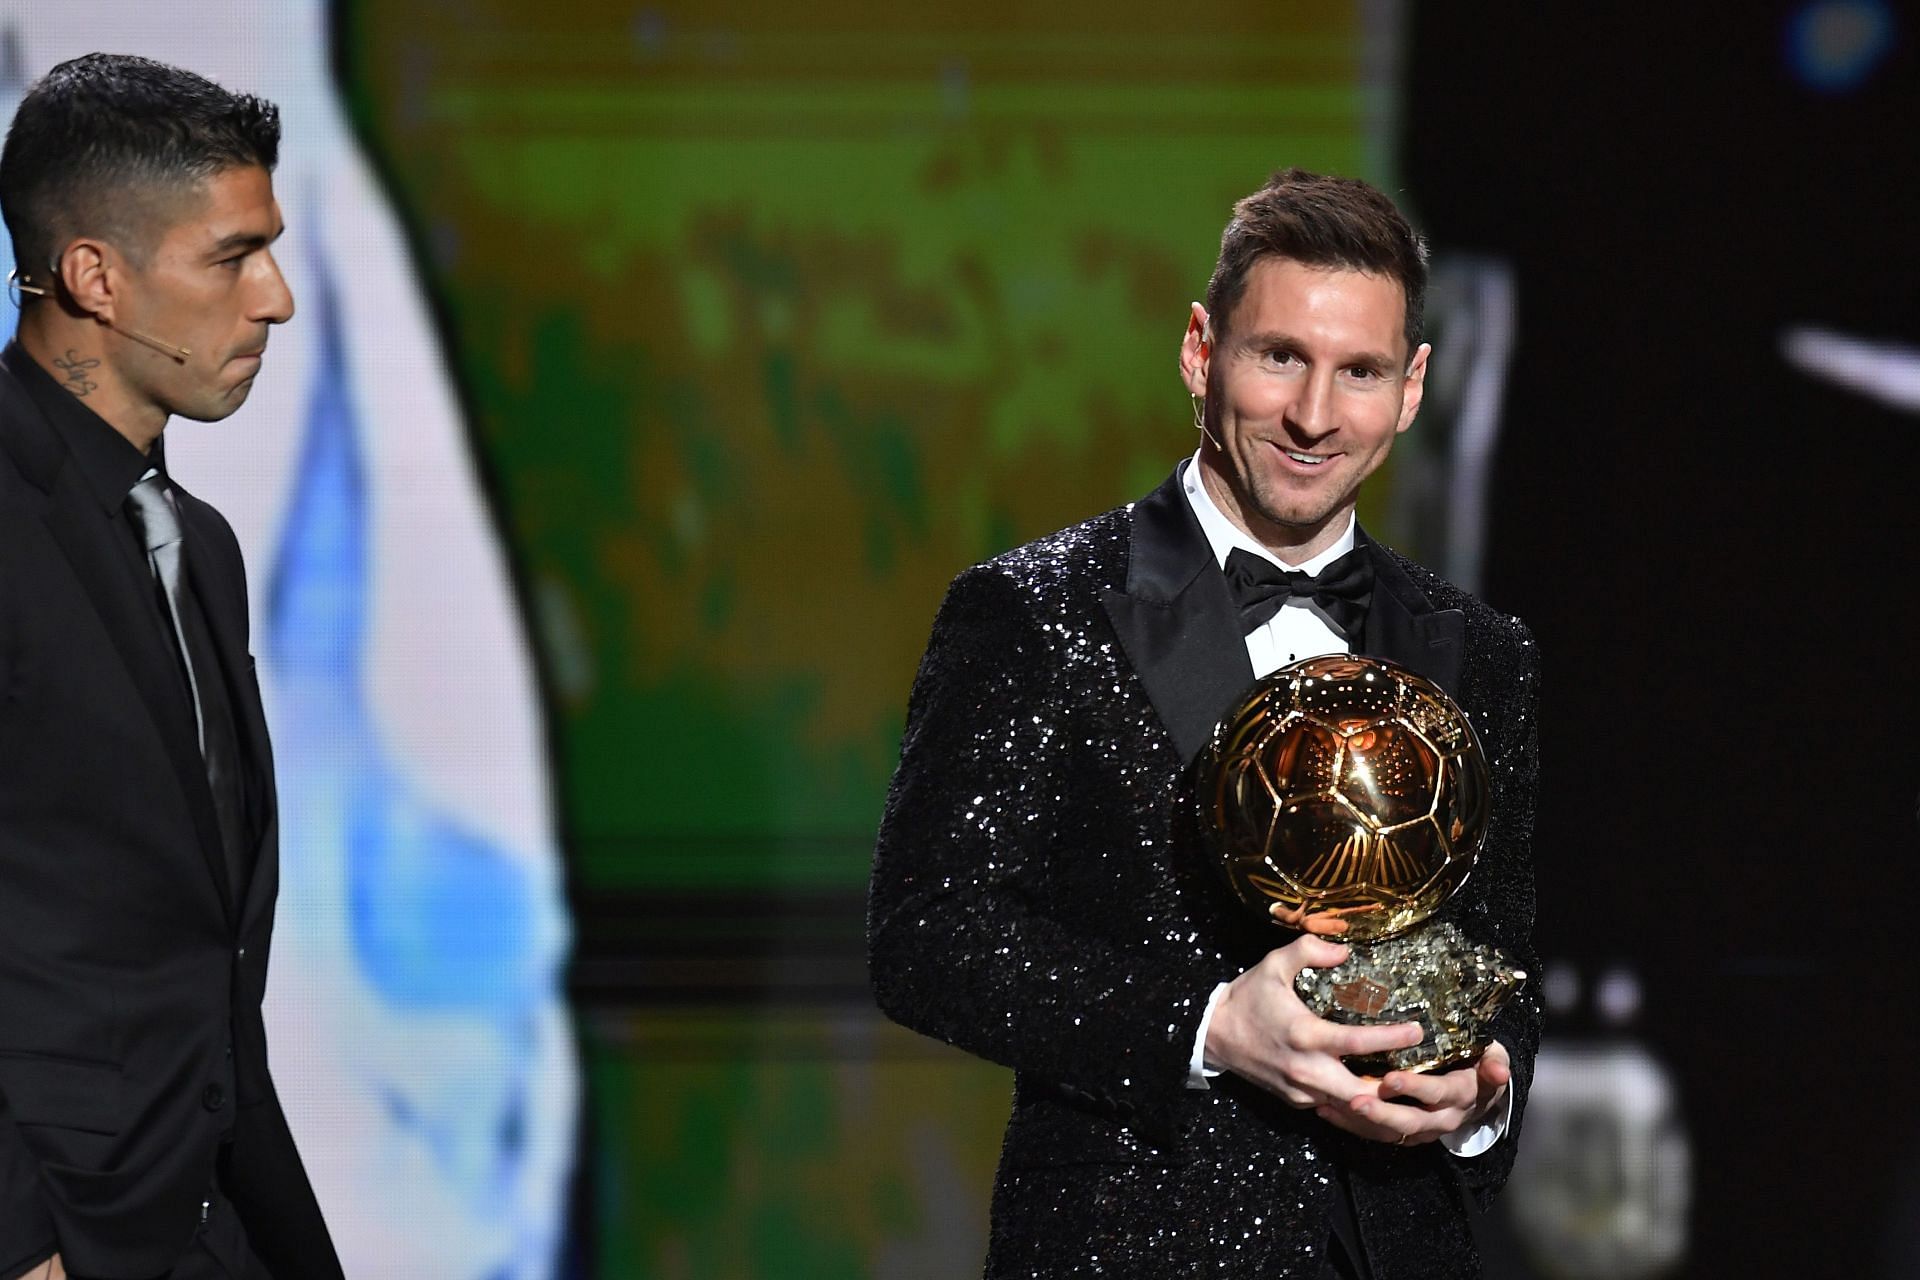 Lionel Messi has won the award seven times.